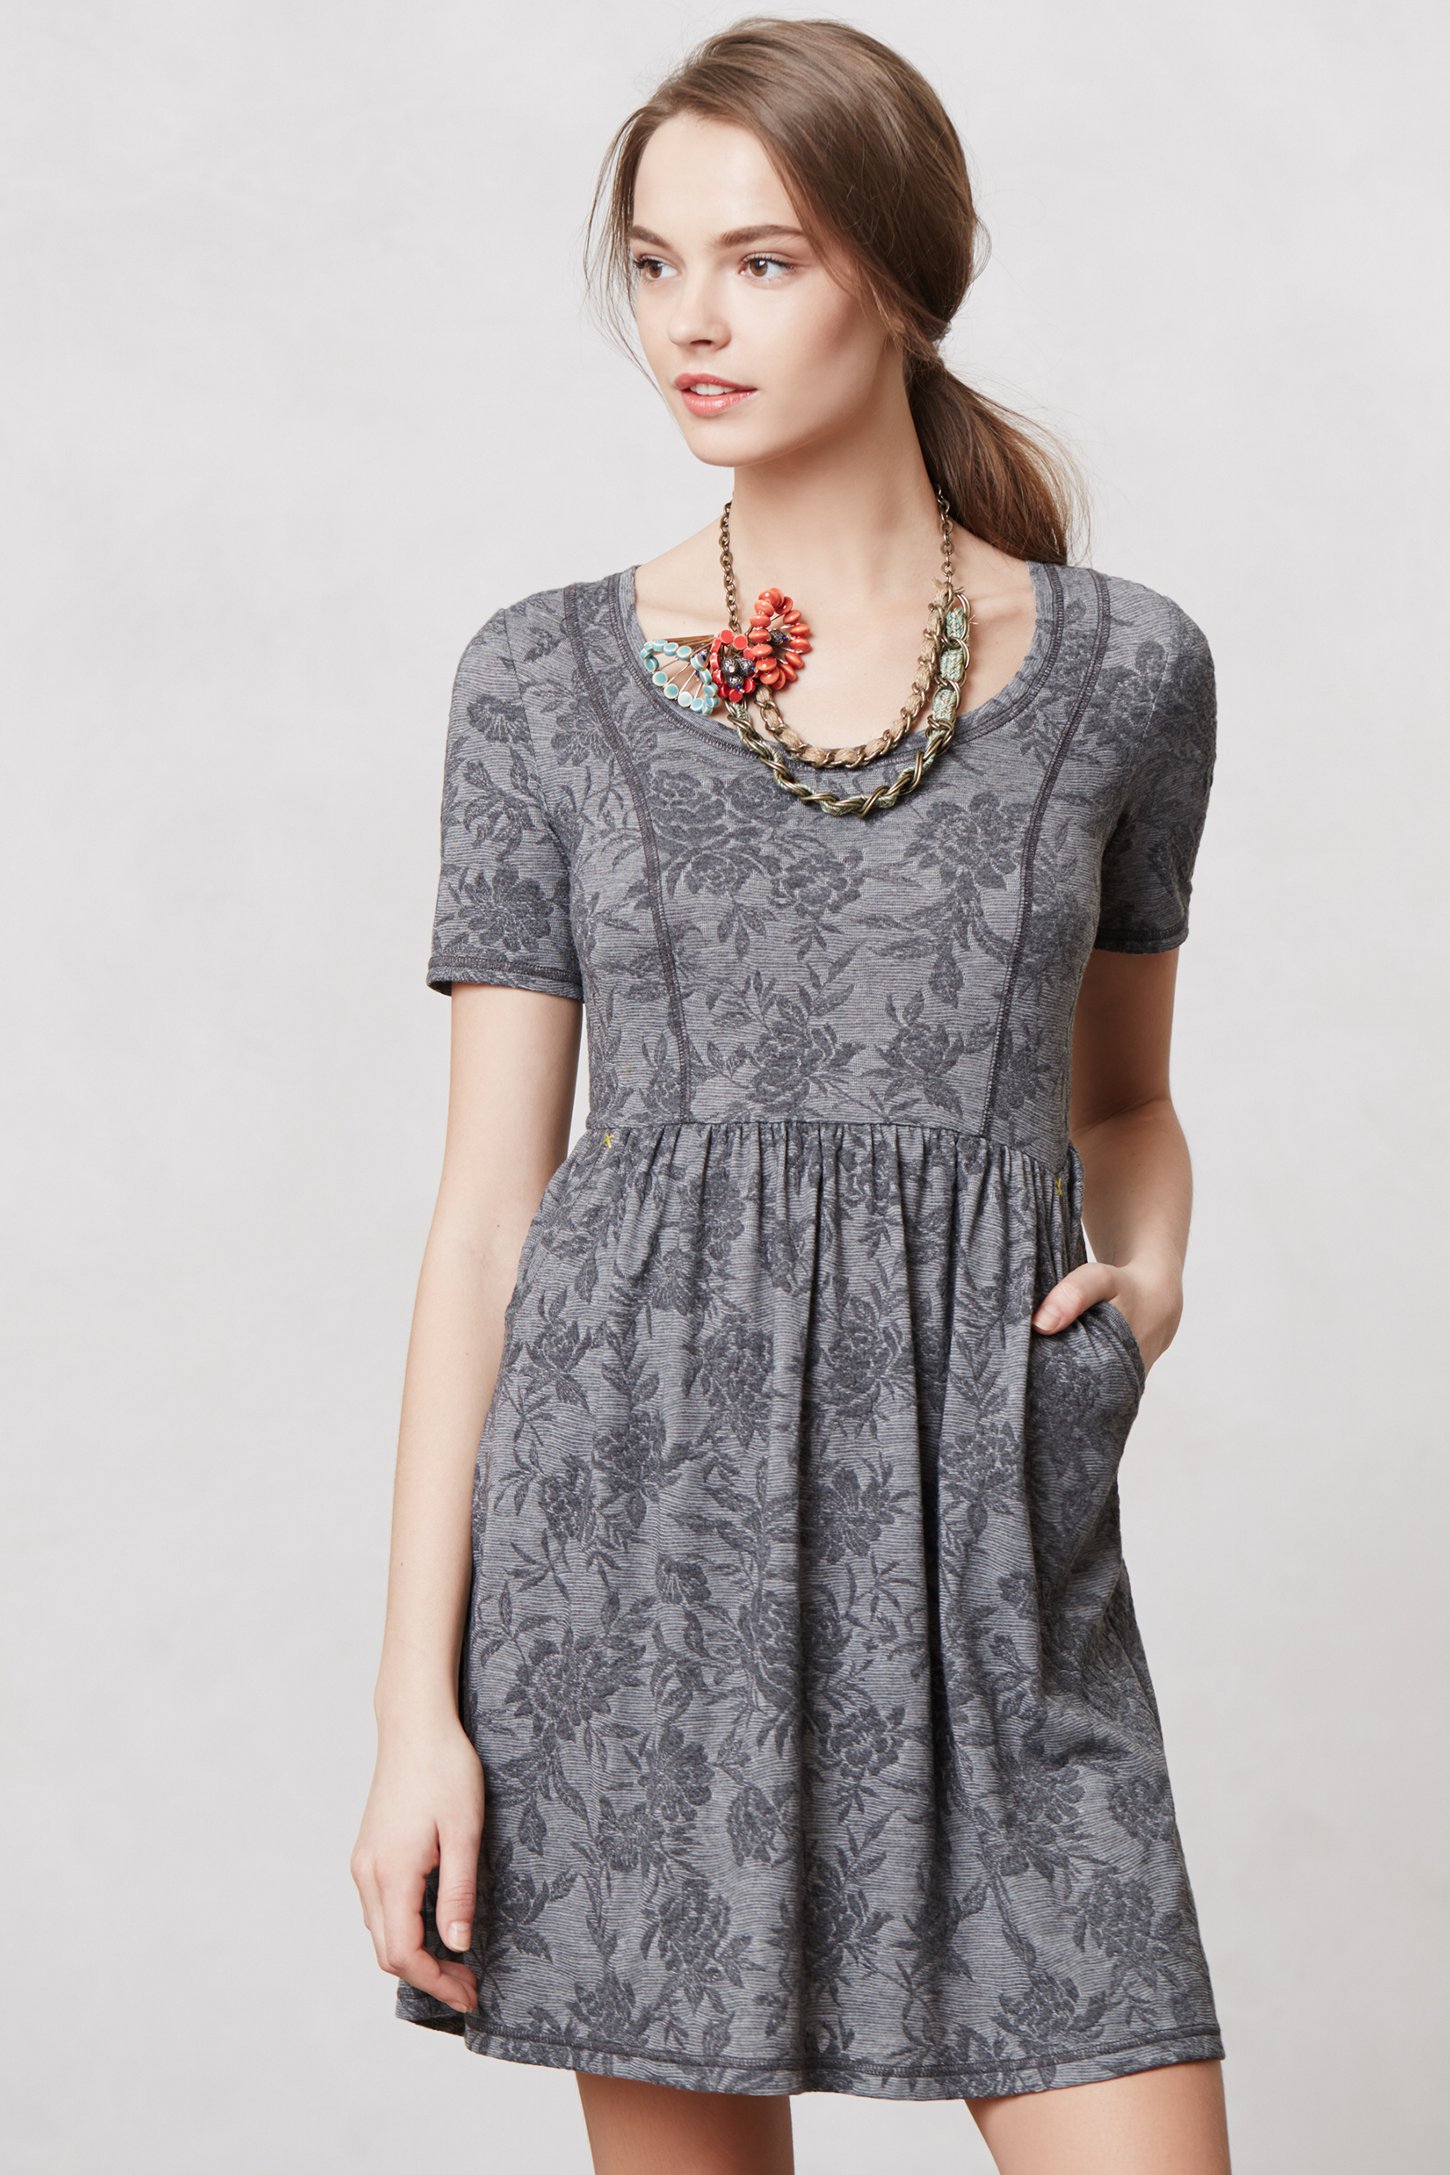 Lyst - Saturday/sunday Jacquard Day Dress in Gray